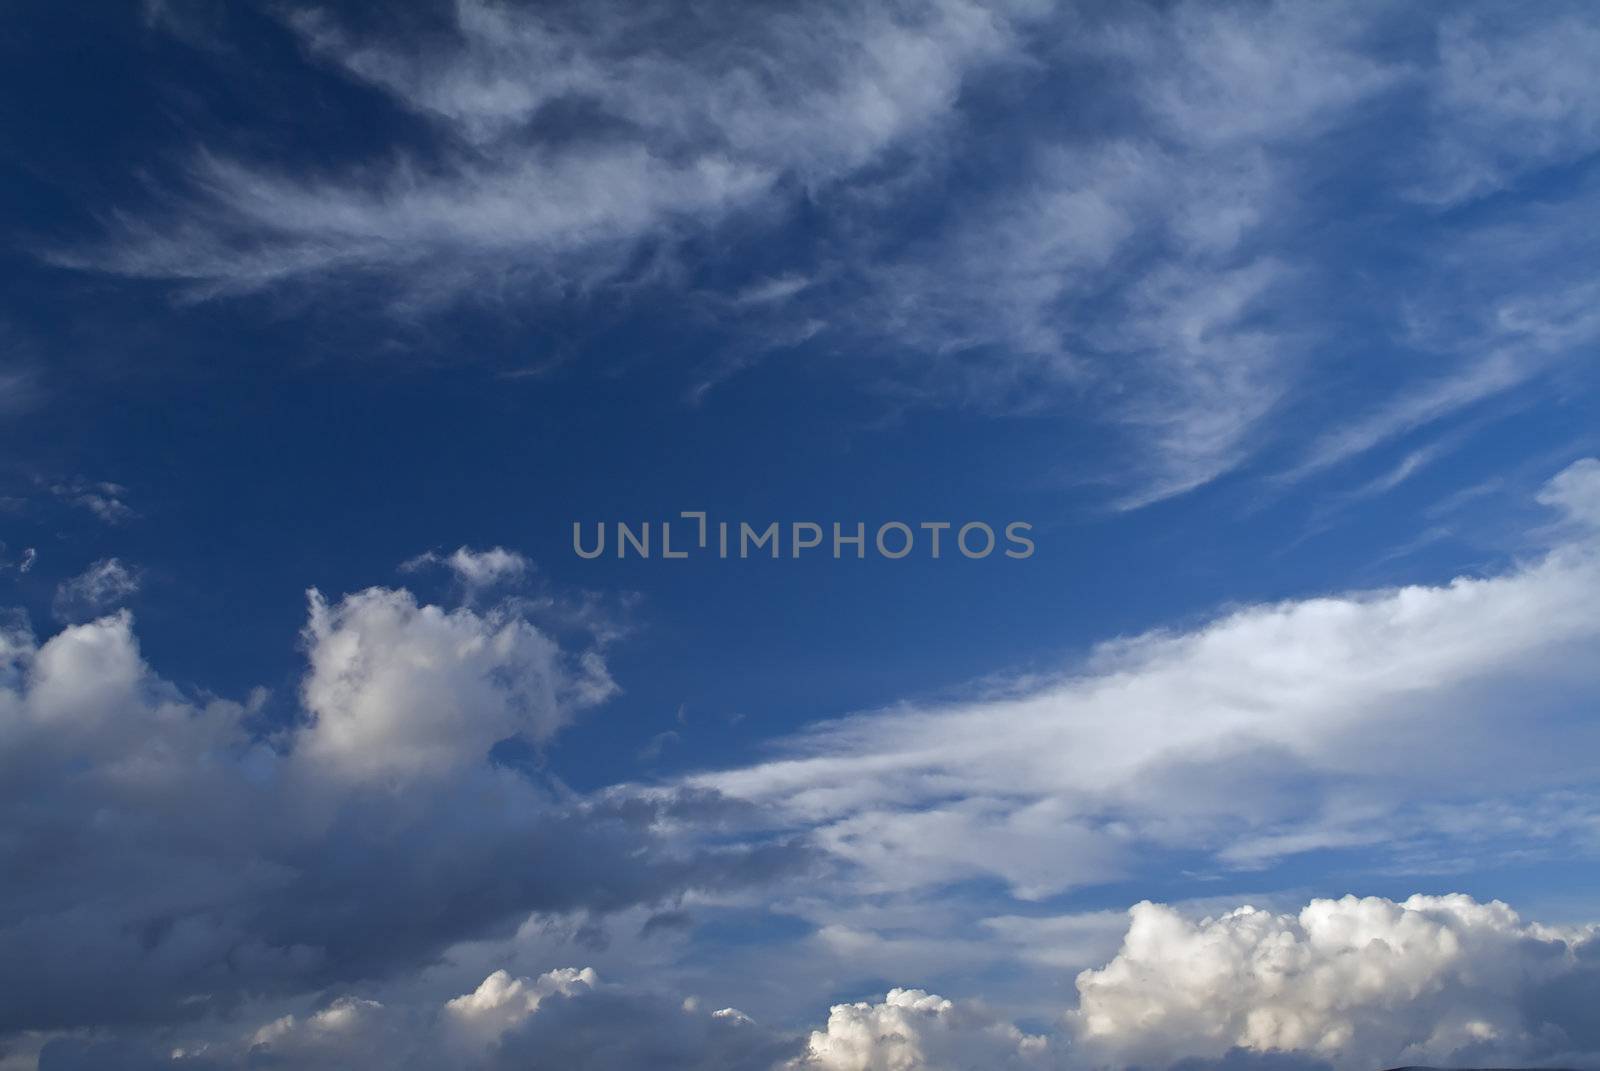 blue sky with dramatic cloudscape with combination of Cirrus and Cumulus clouds